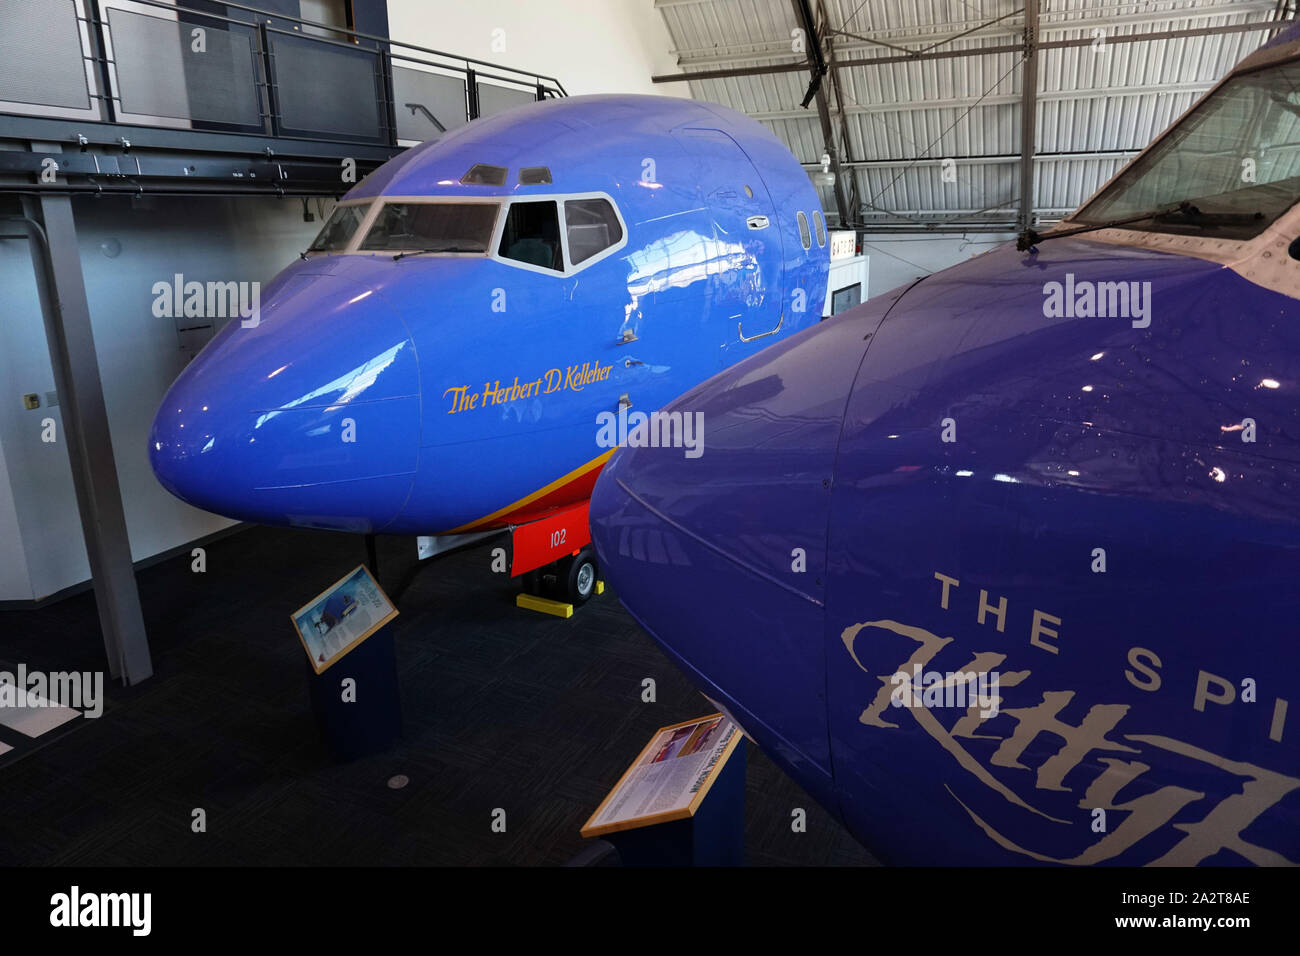 Southwest Airlines history at the  Frontiers of Flight Museum at Love Field in Dallas, Texas  Photo by Dennis Brack Stock Photo